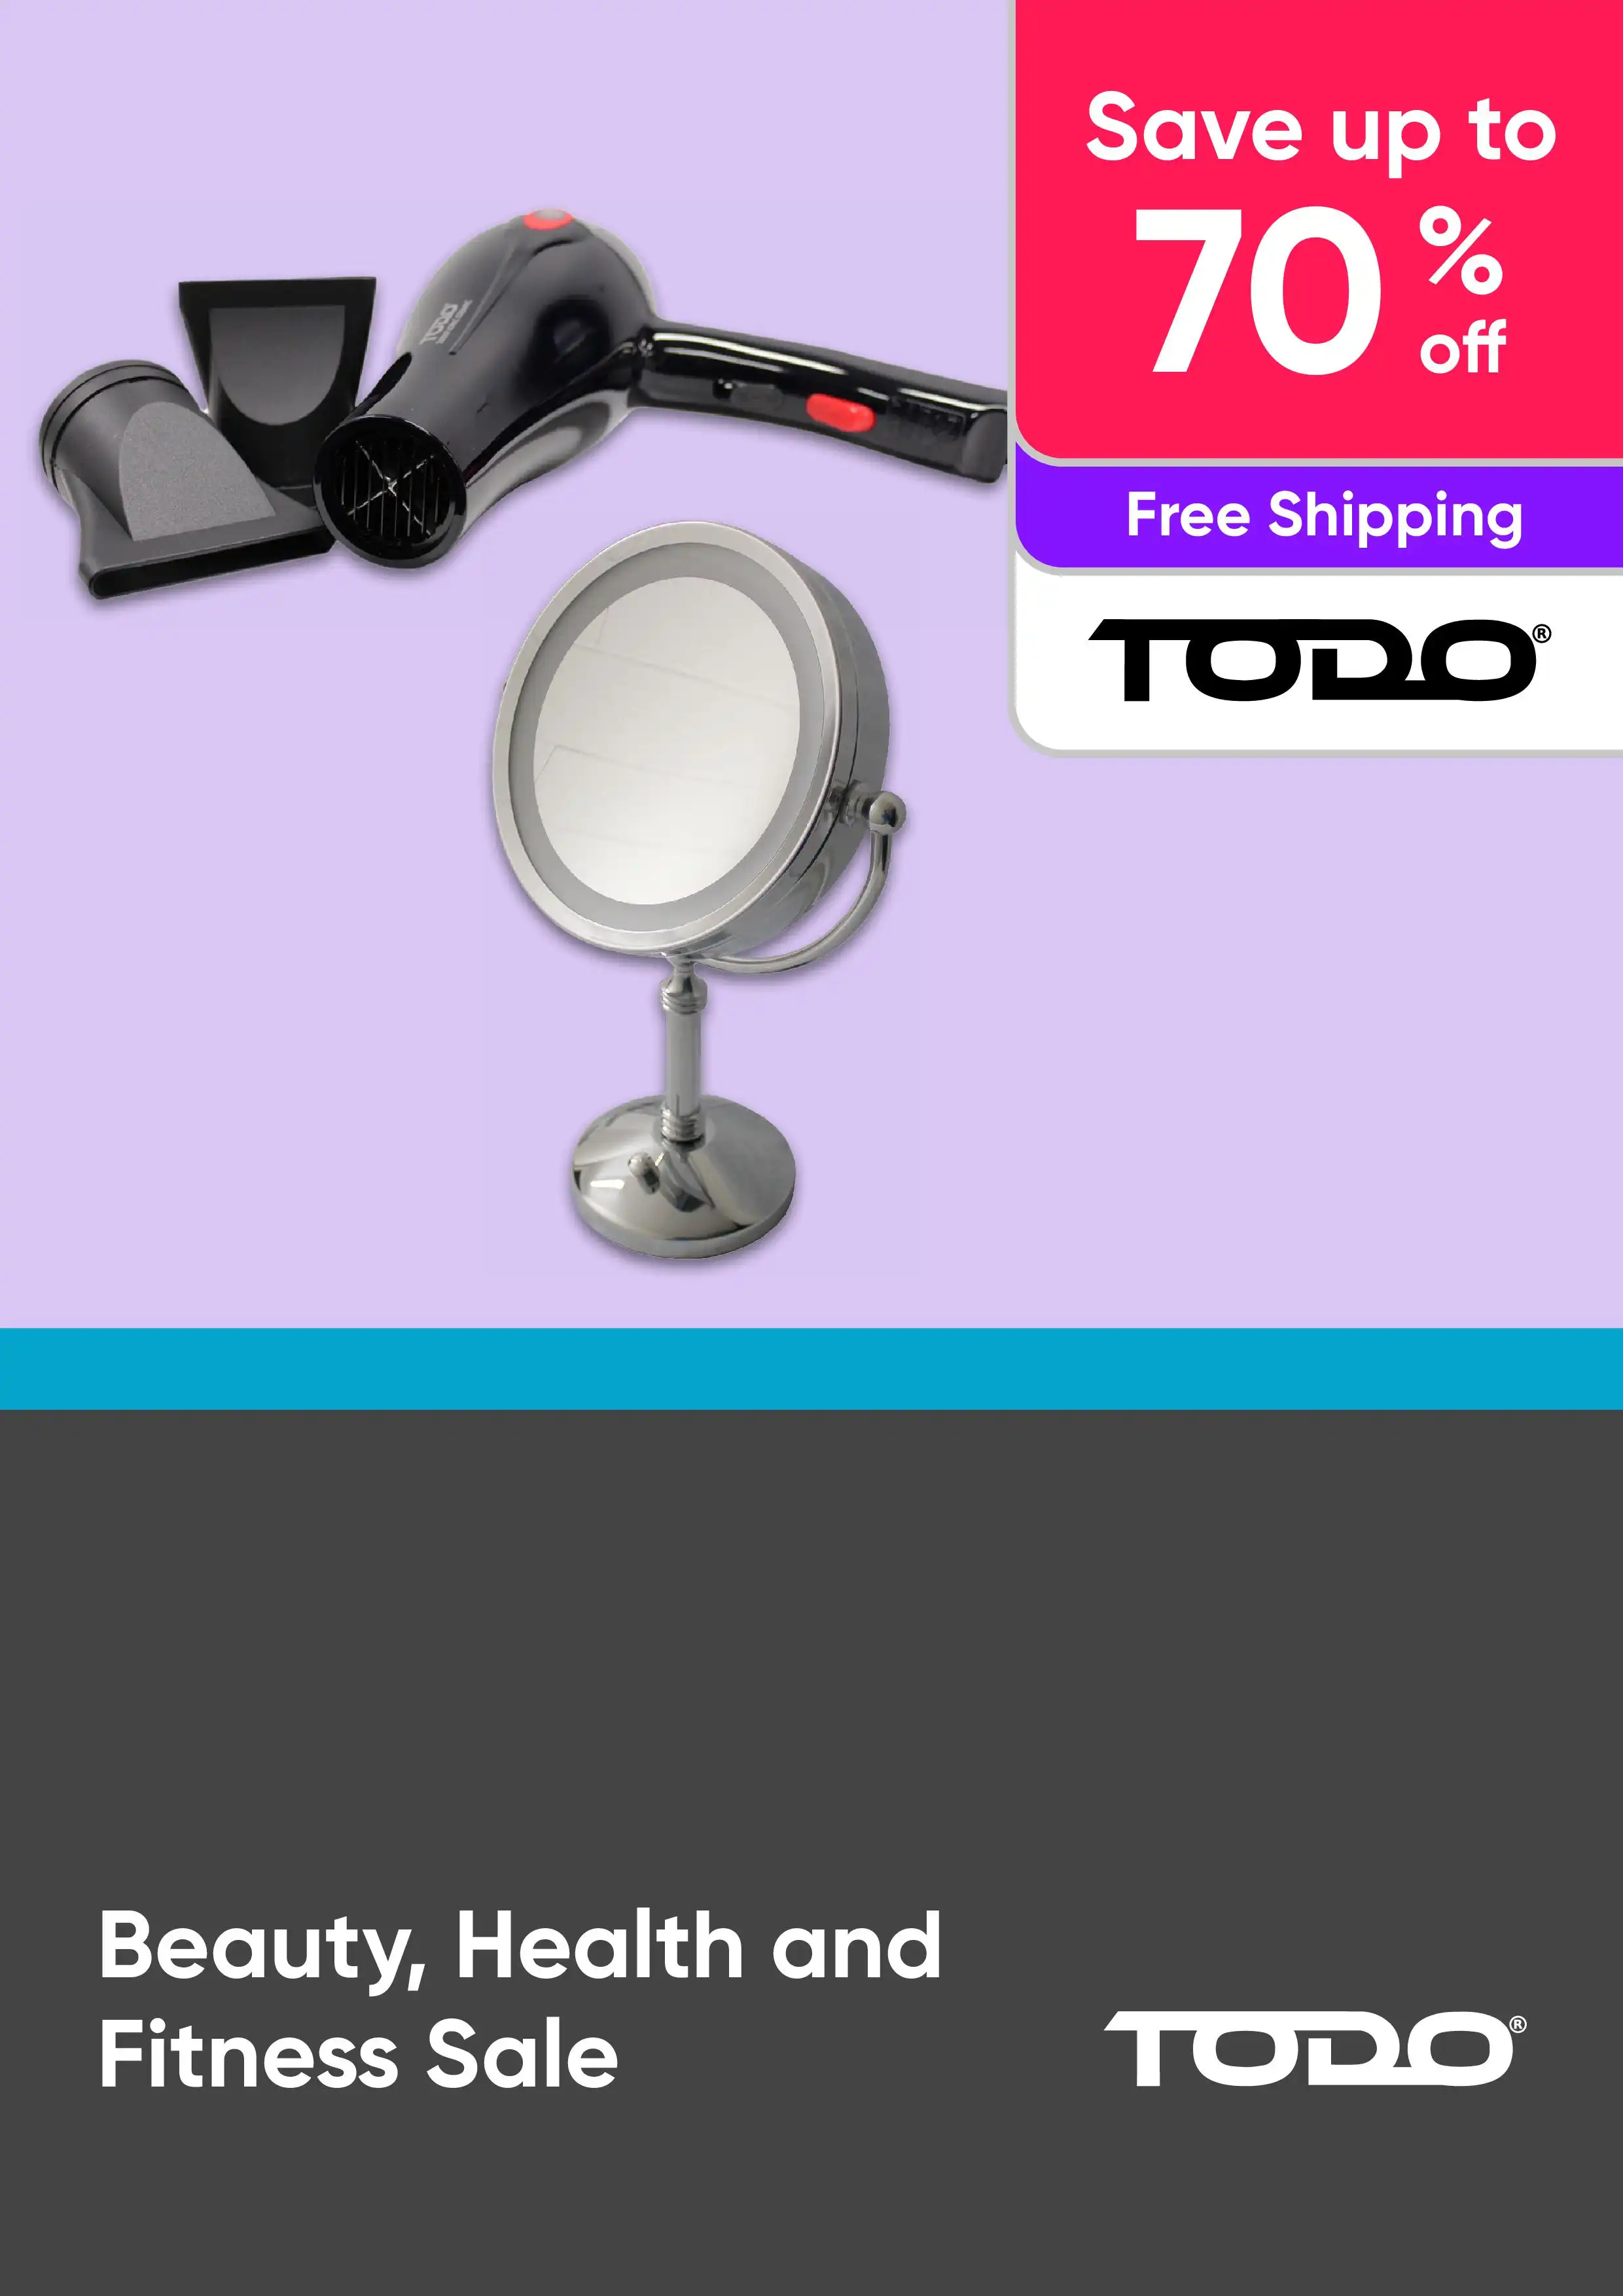 Beauty, Health and Fitness Sale - Hair Devices, Make Up Sets, Body Shapers, Eyelash Kits and More - Up to 70% Off